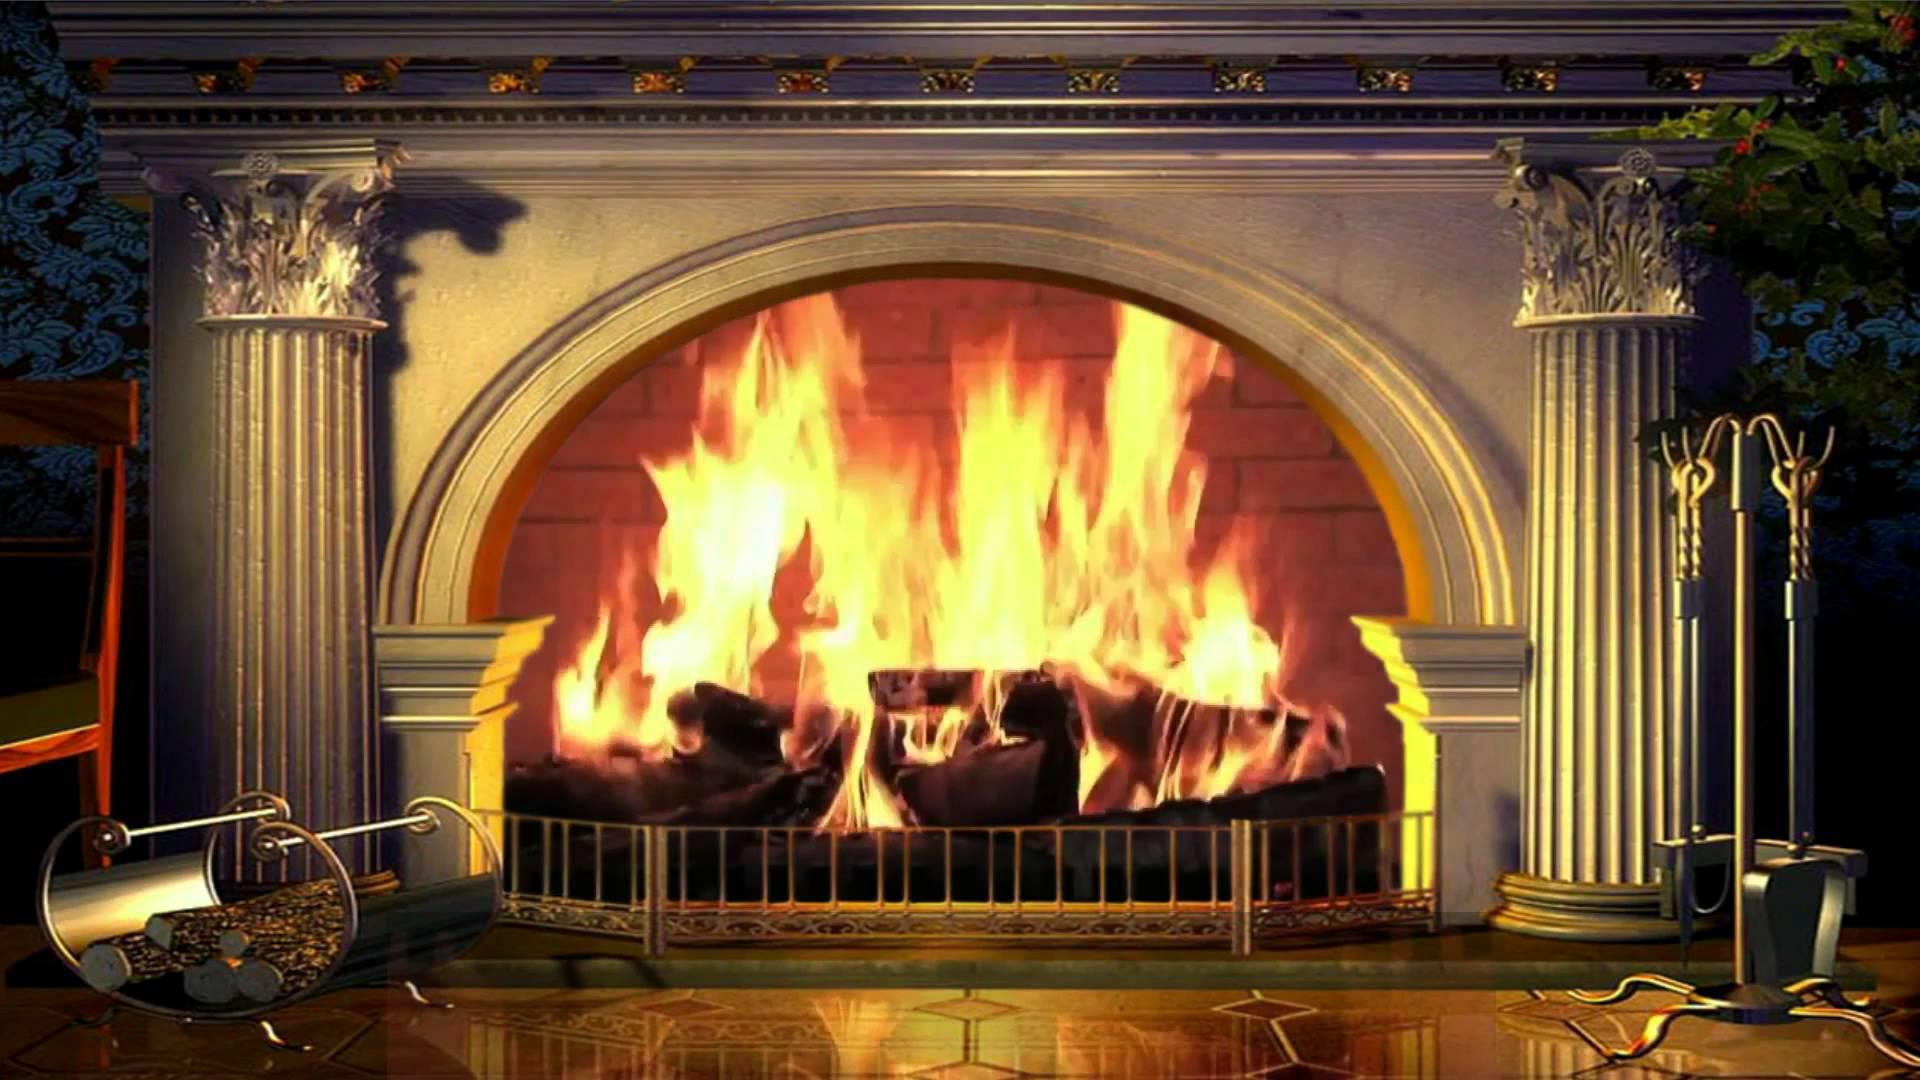 A fire in the fireplace, beautiful wallpaper